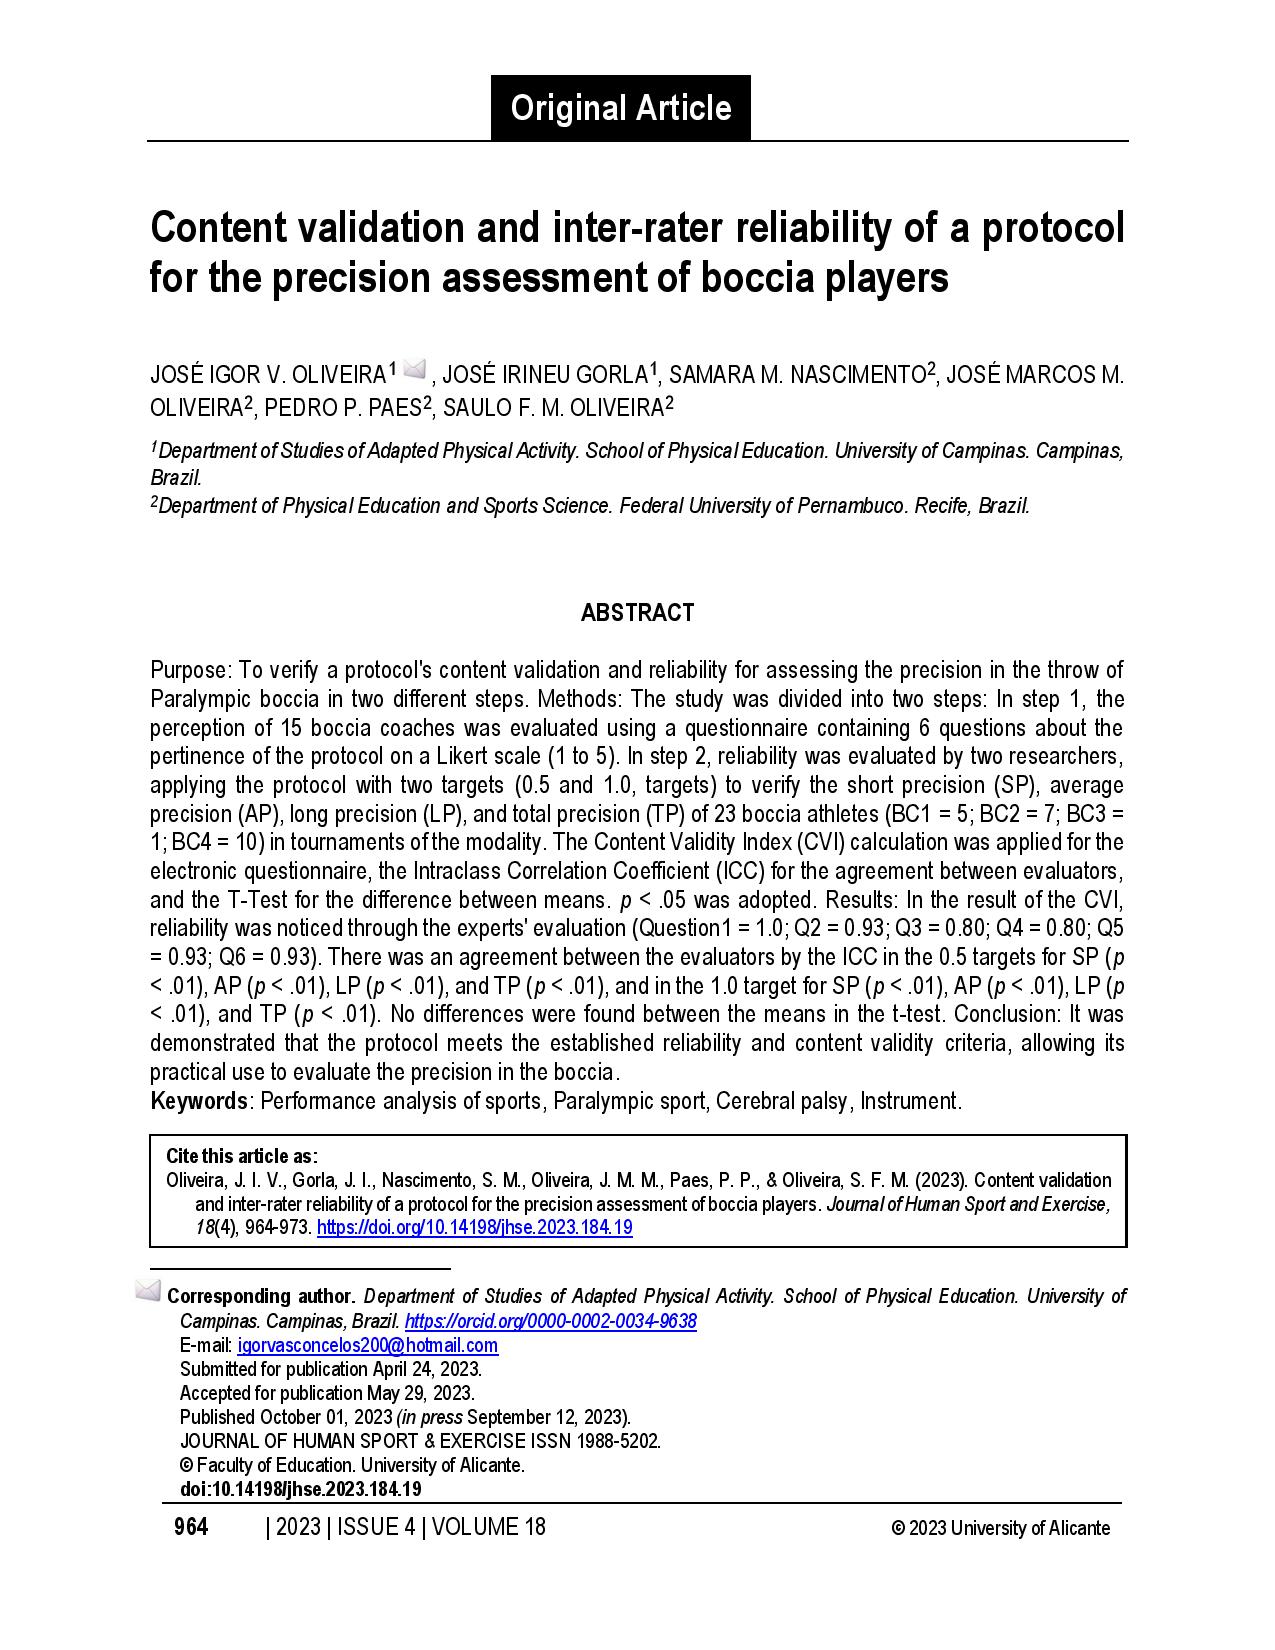 Content validation and inter-rater reliability of a protocol for the precision assessment of boccia players